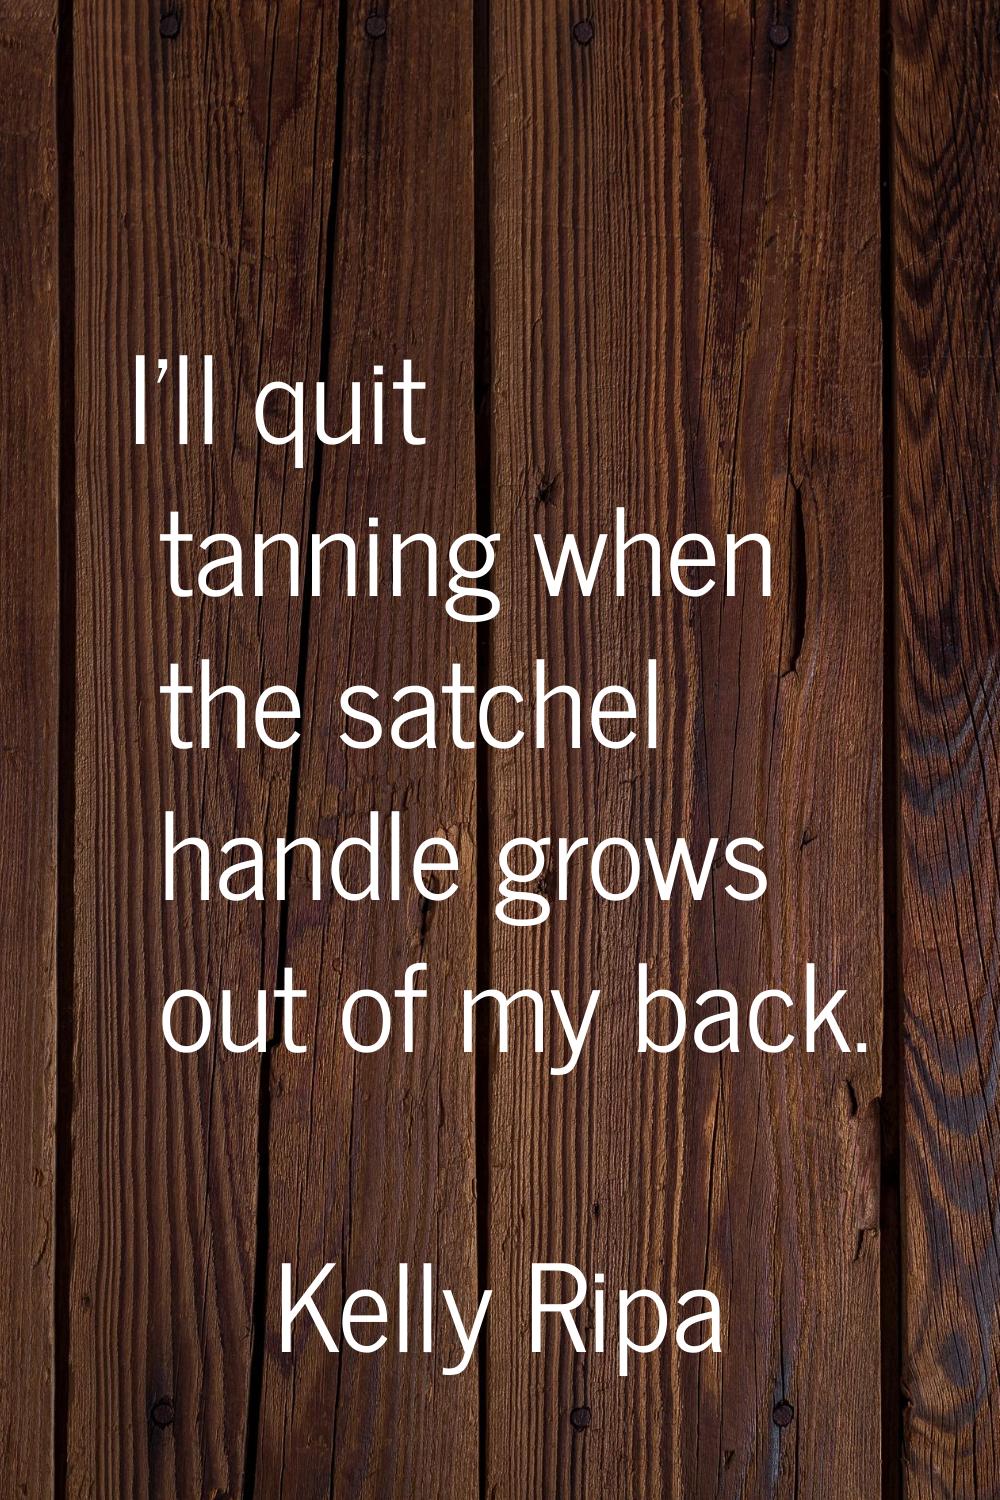 I'll quit tanning when the satchel handle grows out of my back.